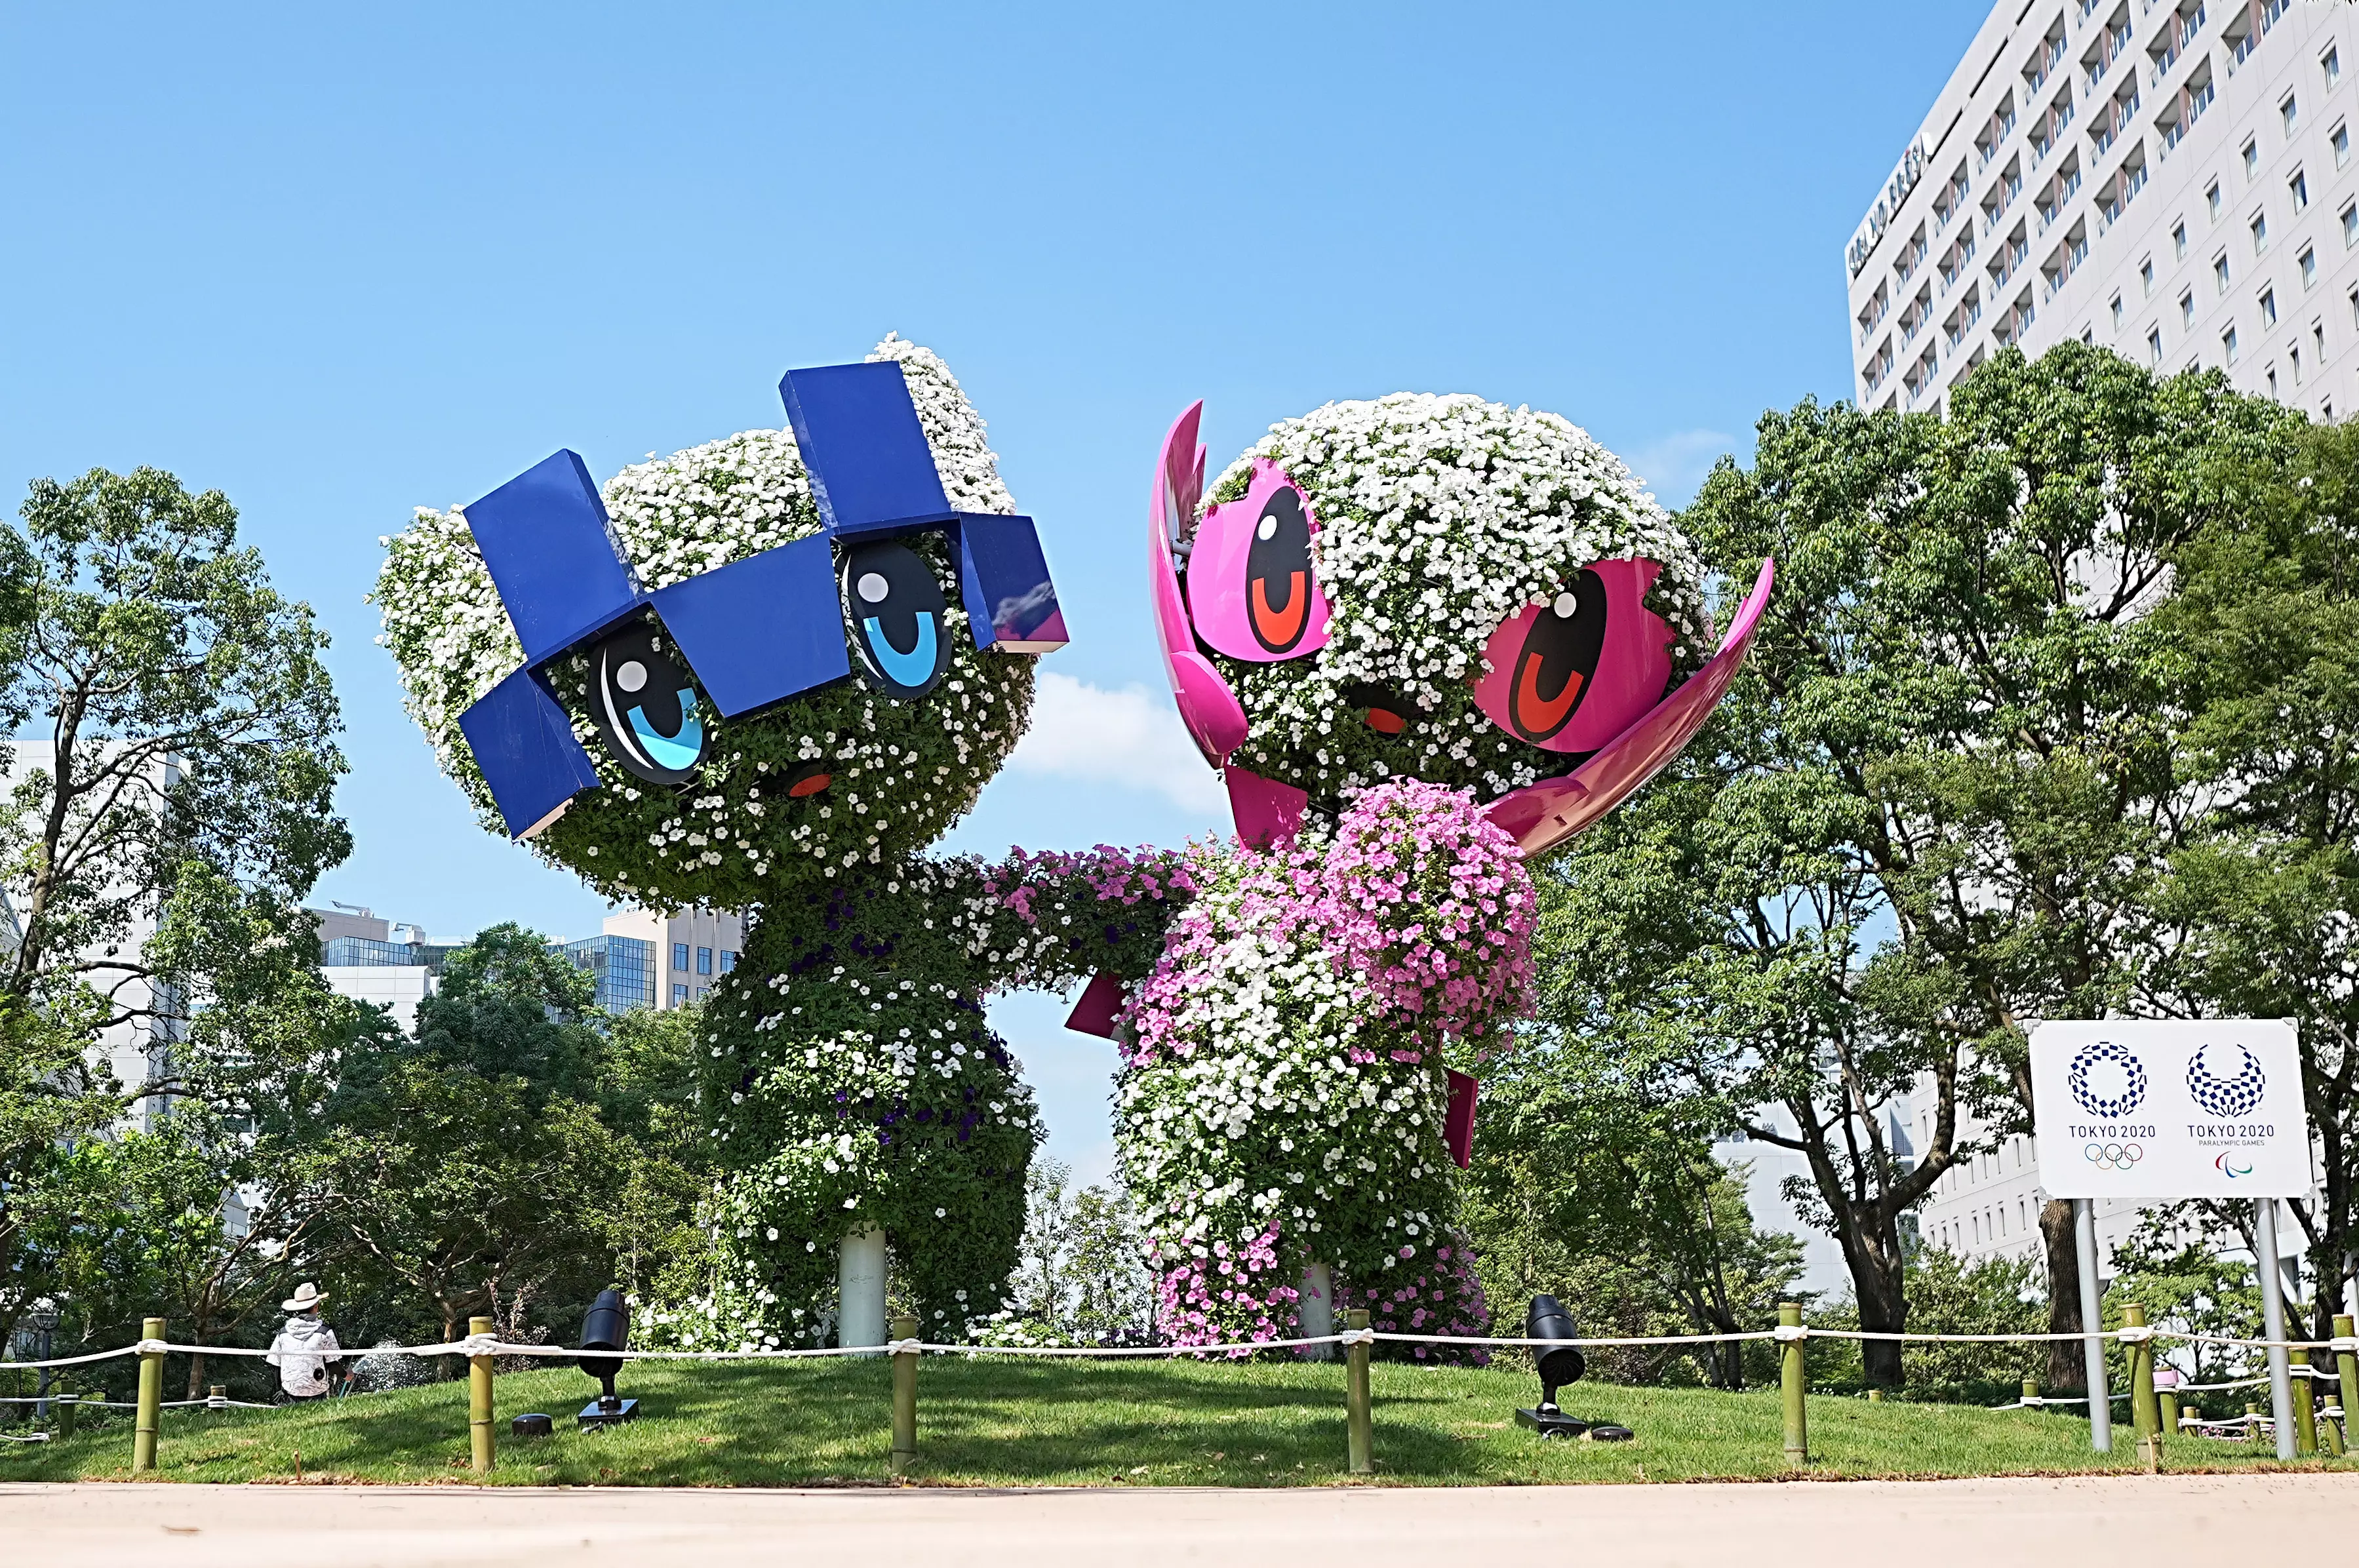 Figures formed from plants represent the mascots Miraitowa (L) for the Olympics and Someity (R) for the Paralympics. (